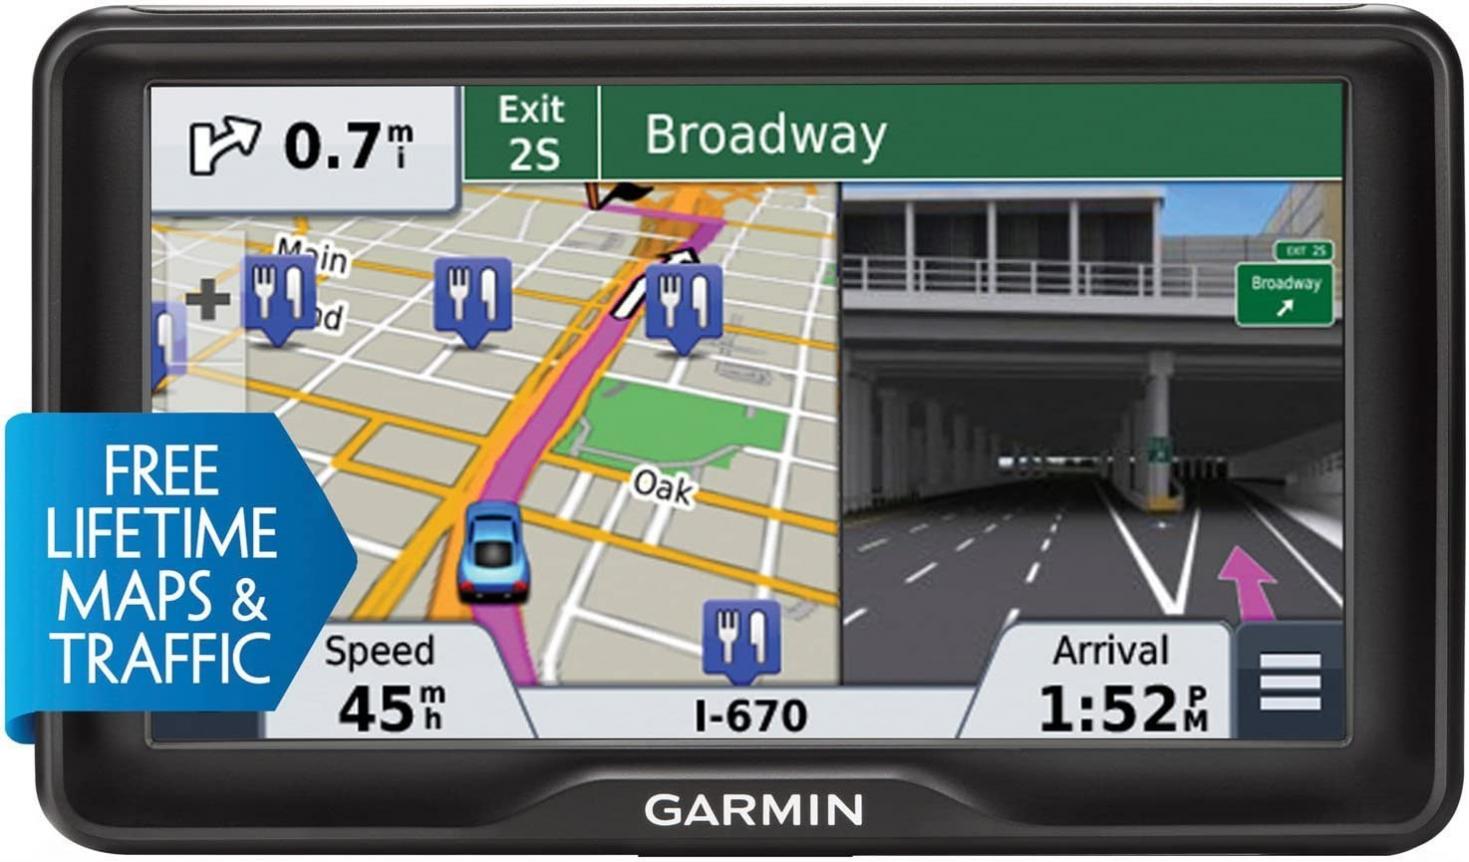 Garmin nuvi 2797LMT 7-Inch Portable Bluetooth Vehicle GPS with Lifetime Maps and Traffic (Renewed)